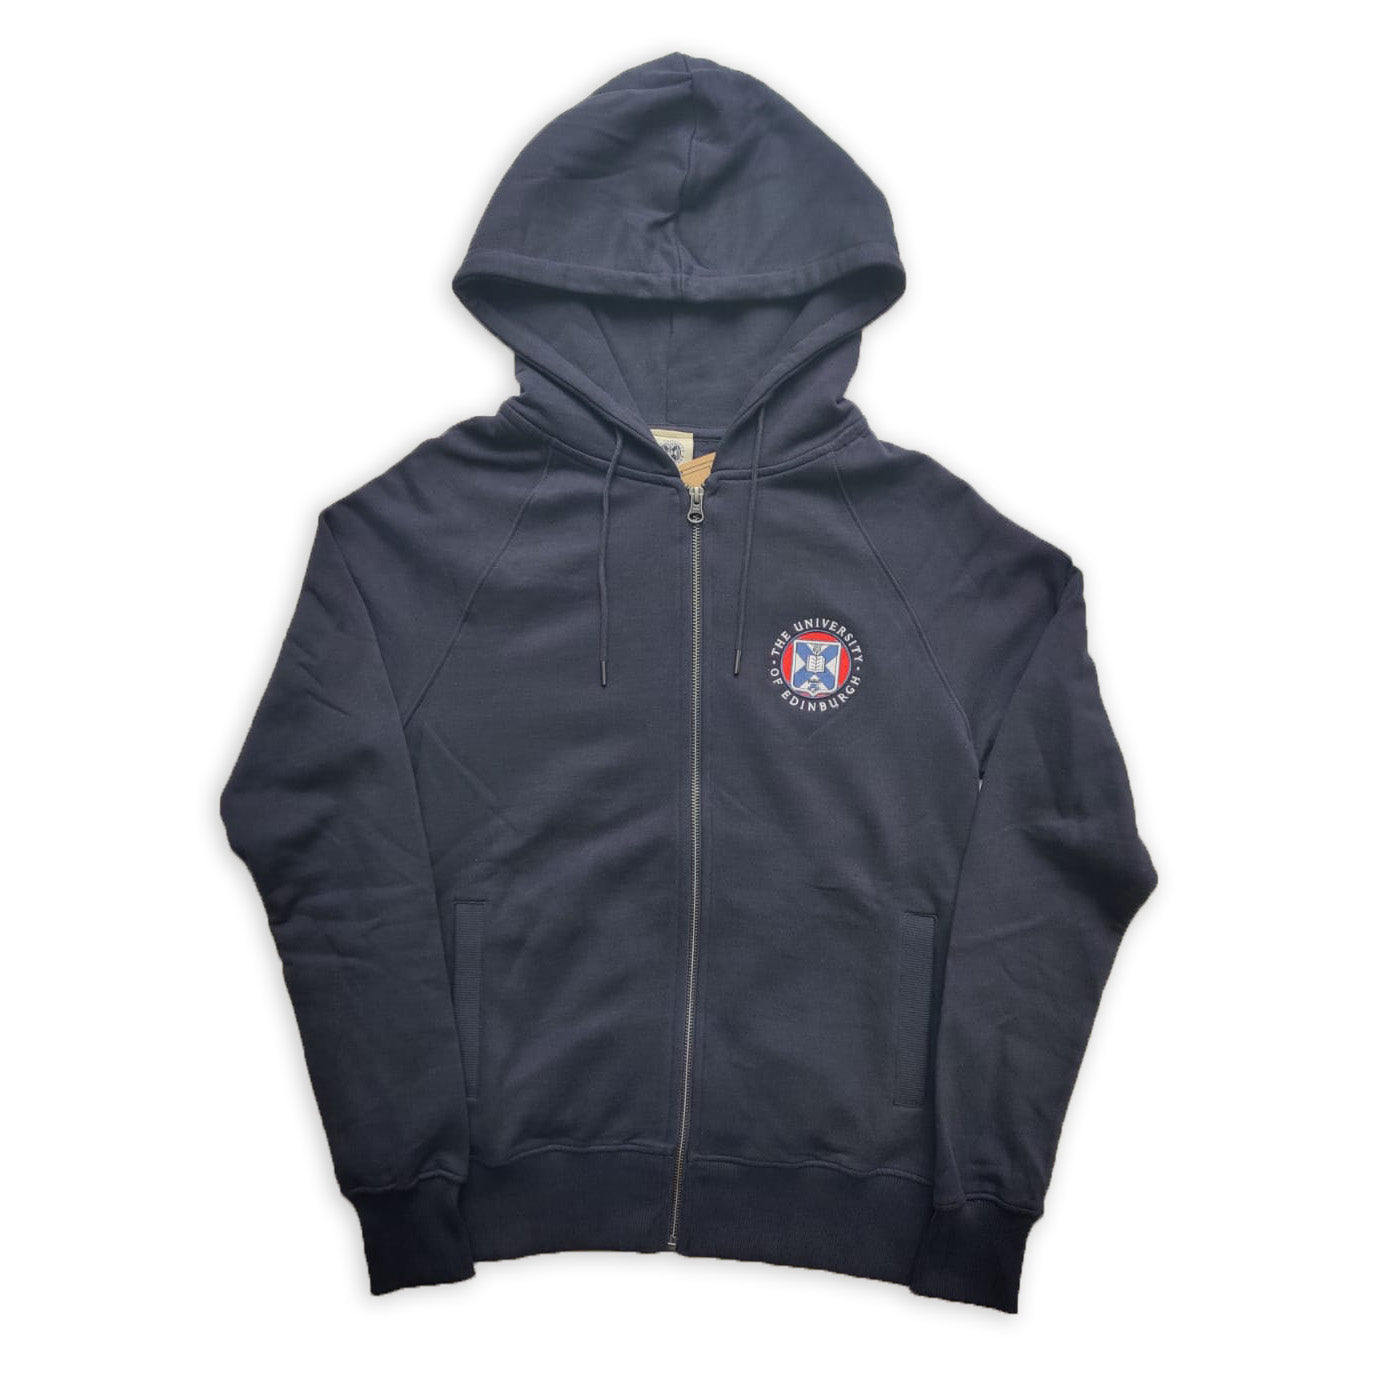 Navy zip up hoodie with full colour embroidered crest on the chest.